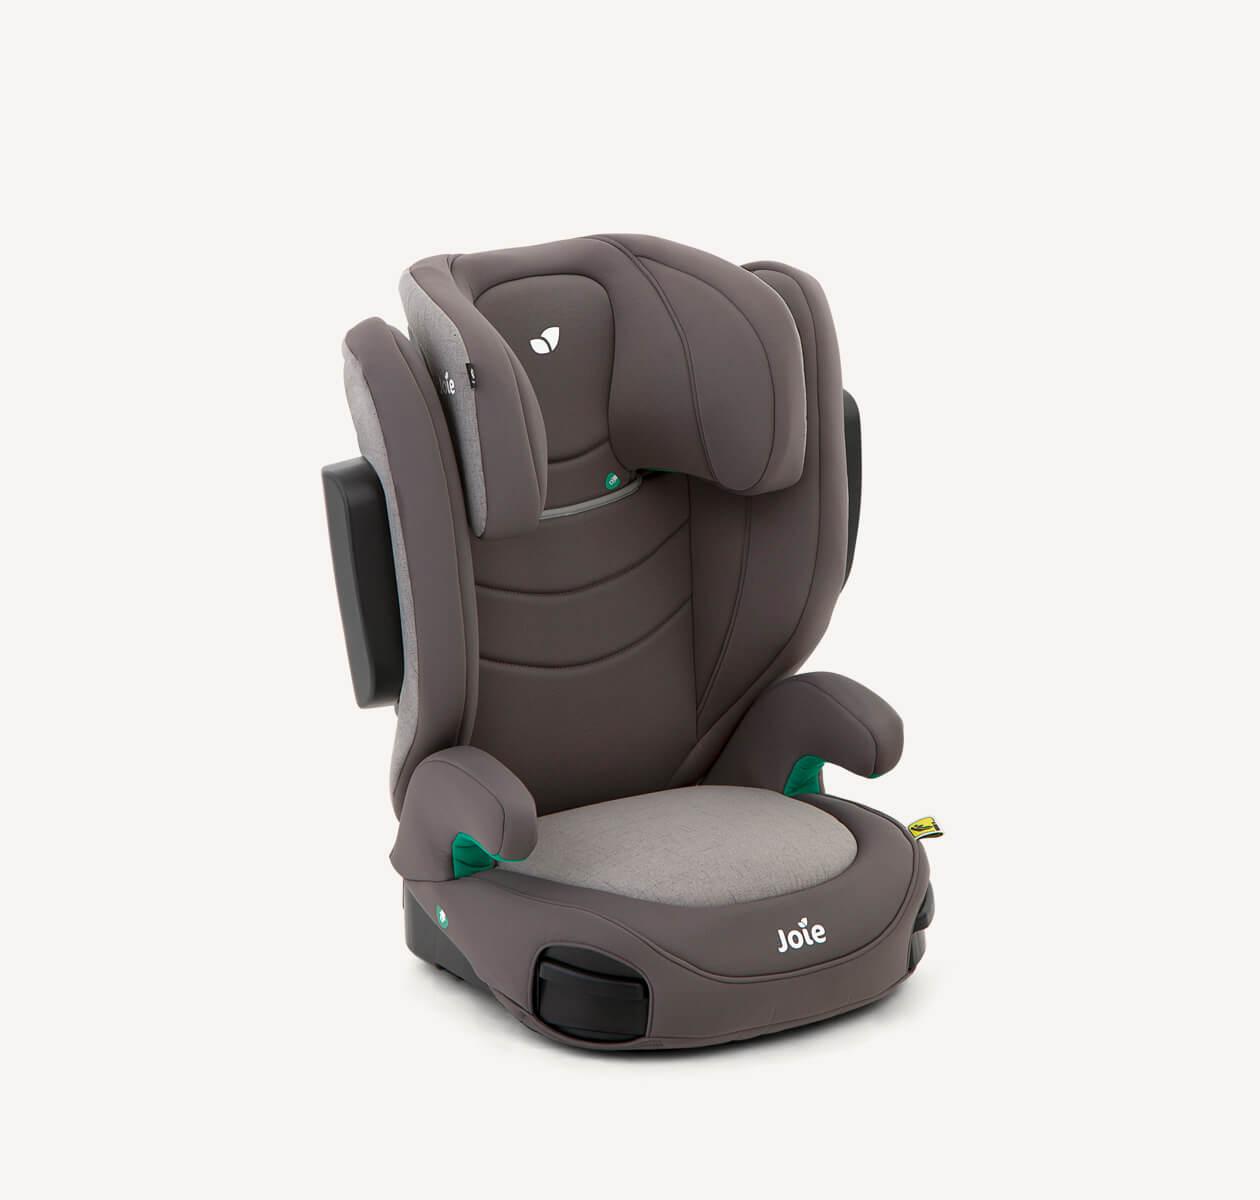  Joie booster seat I-Trillo lx in light gray at an angle. 